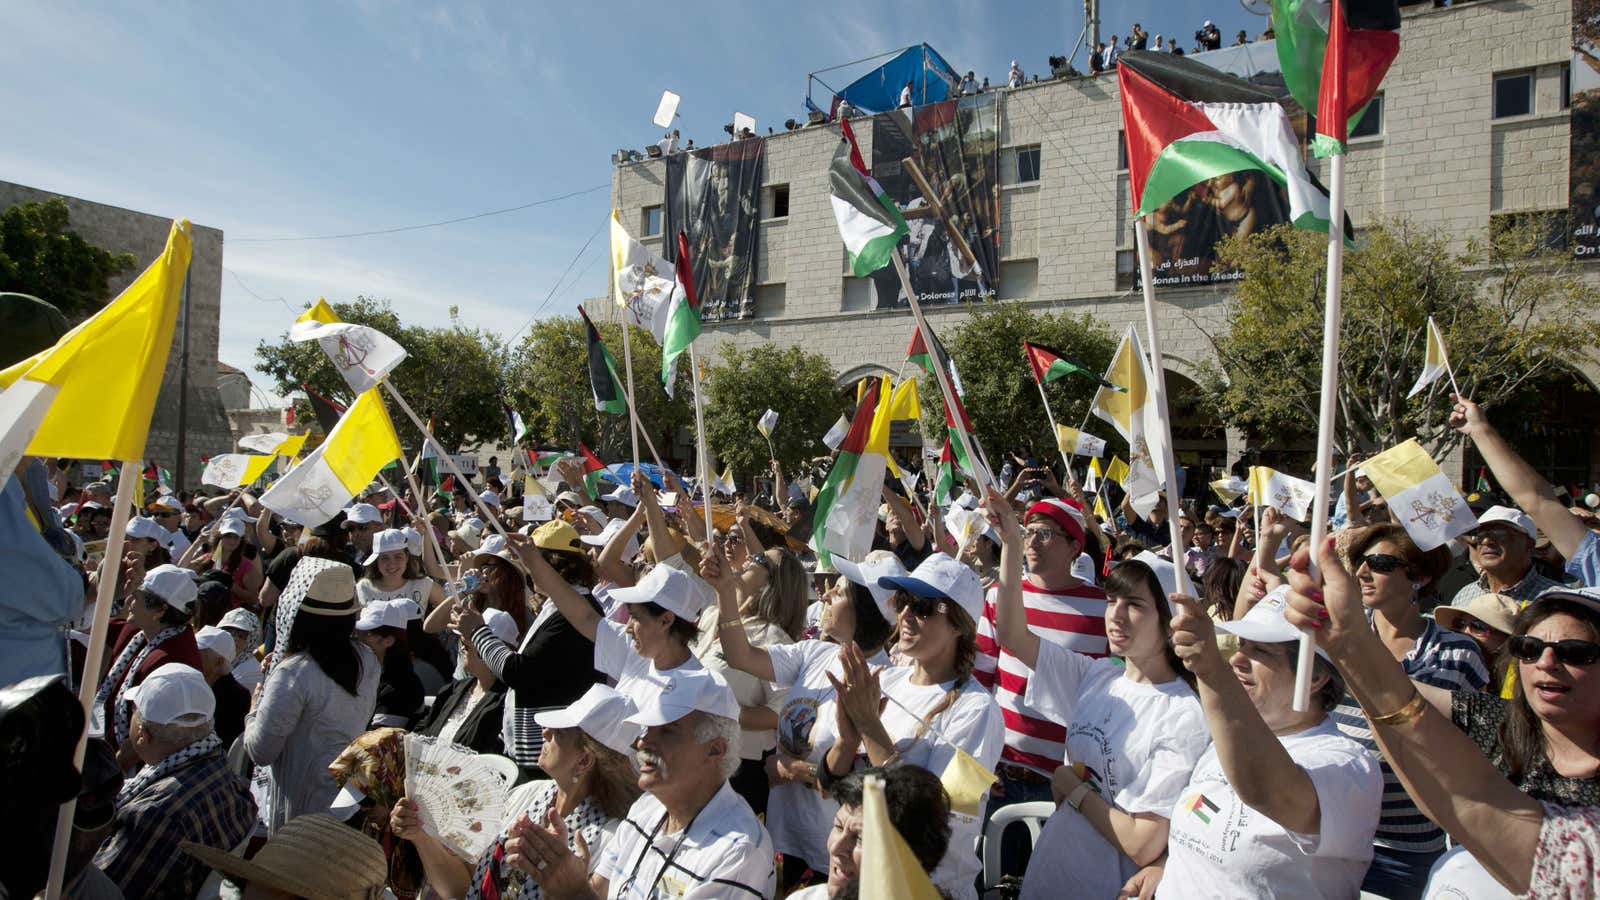 Pope Francis was greeted by jubilant crowds during a 2014 visit to the West Bank town of Bethlehem.